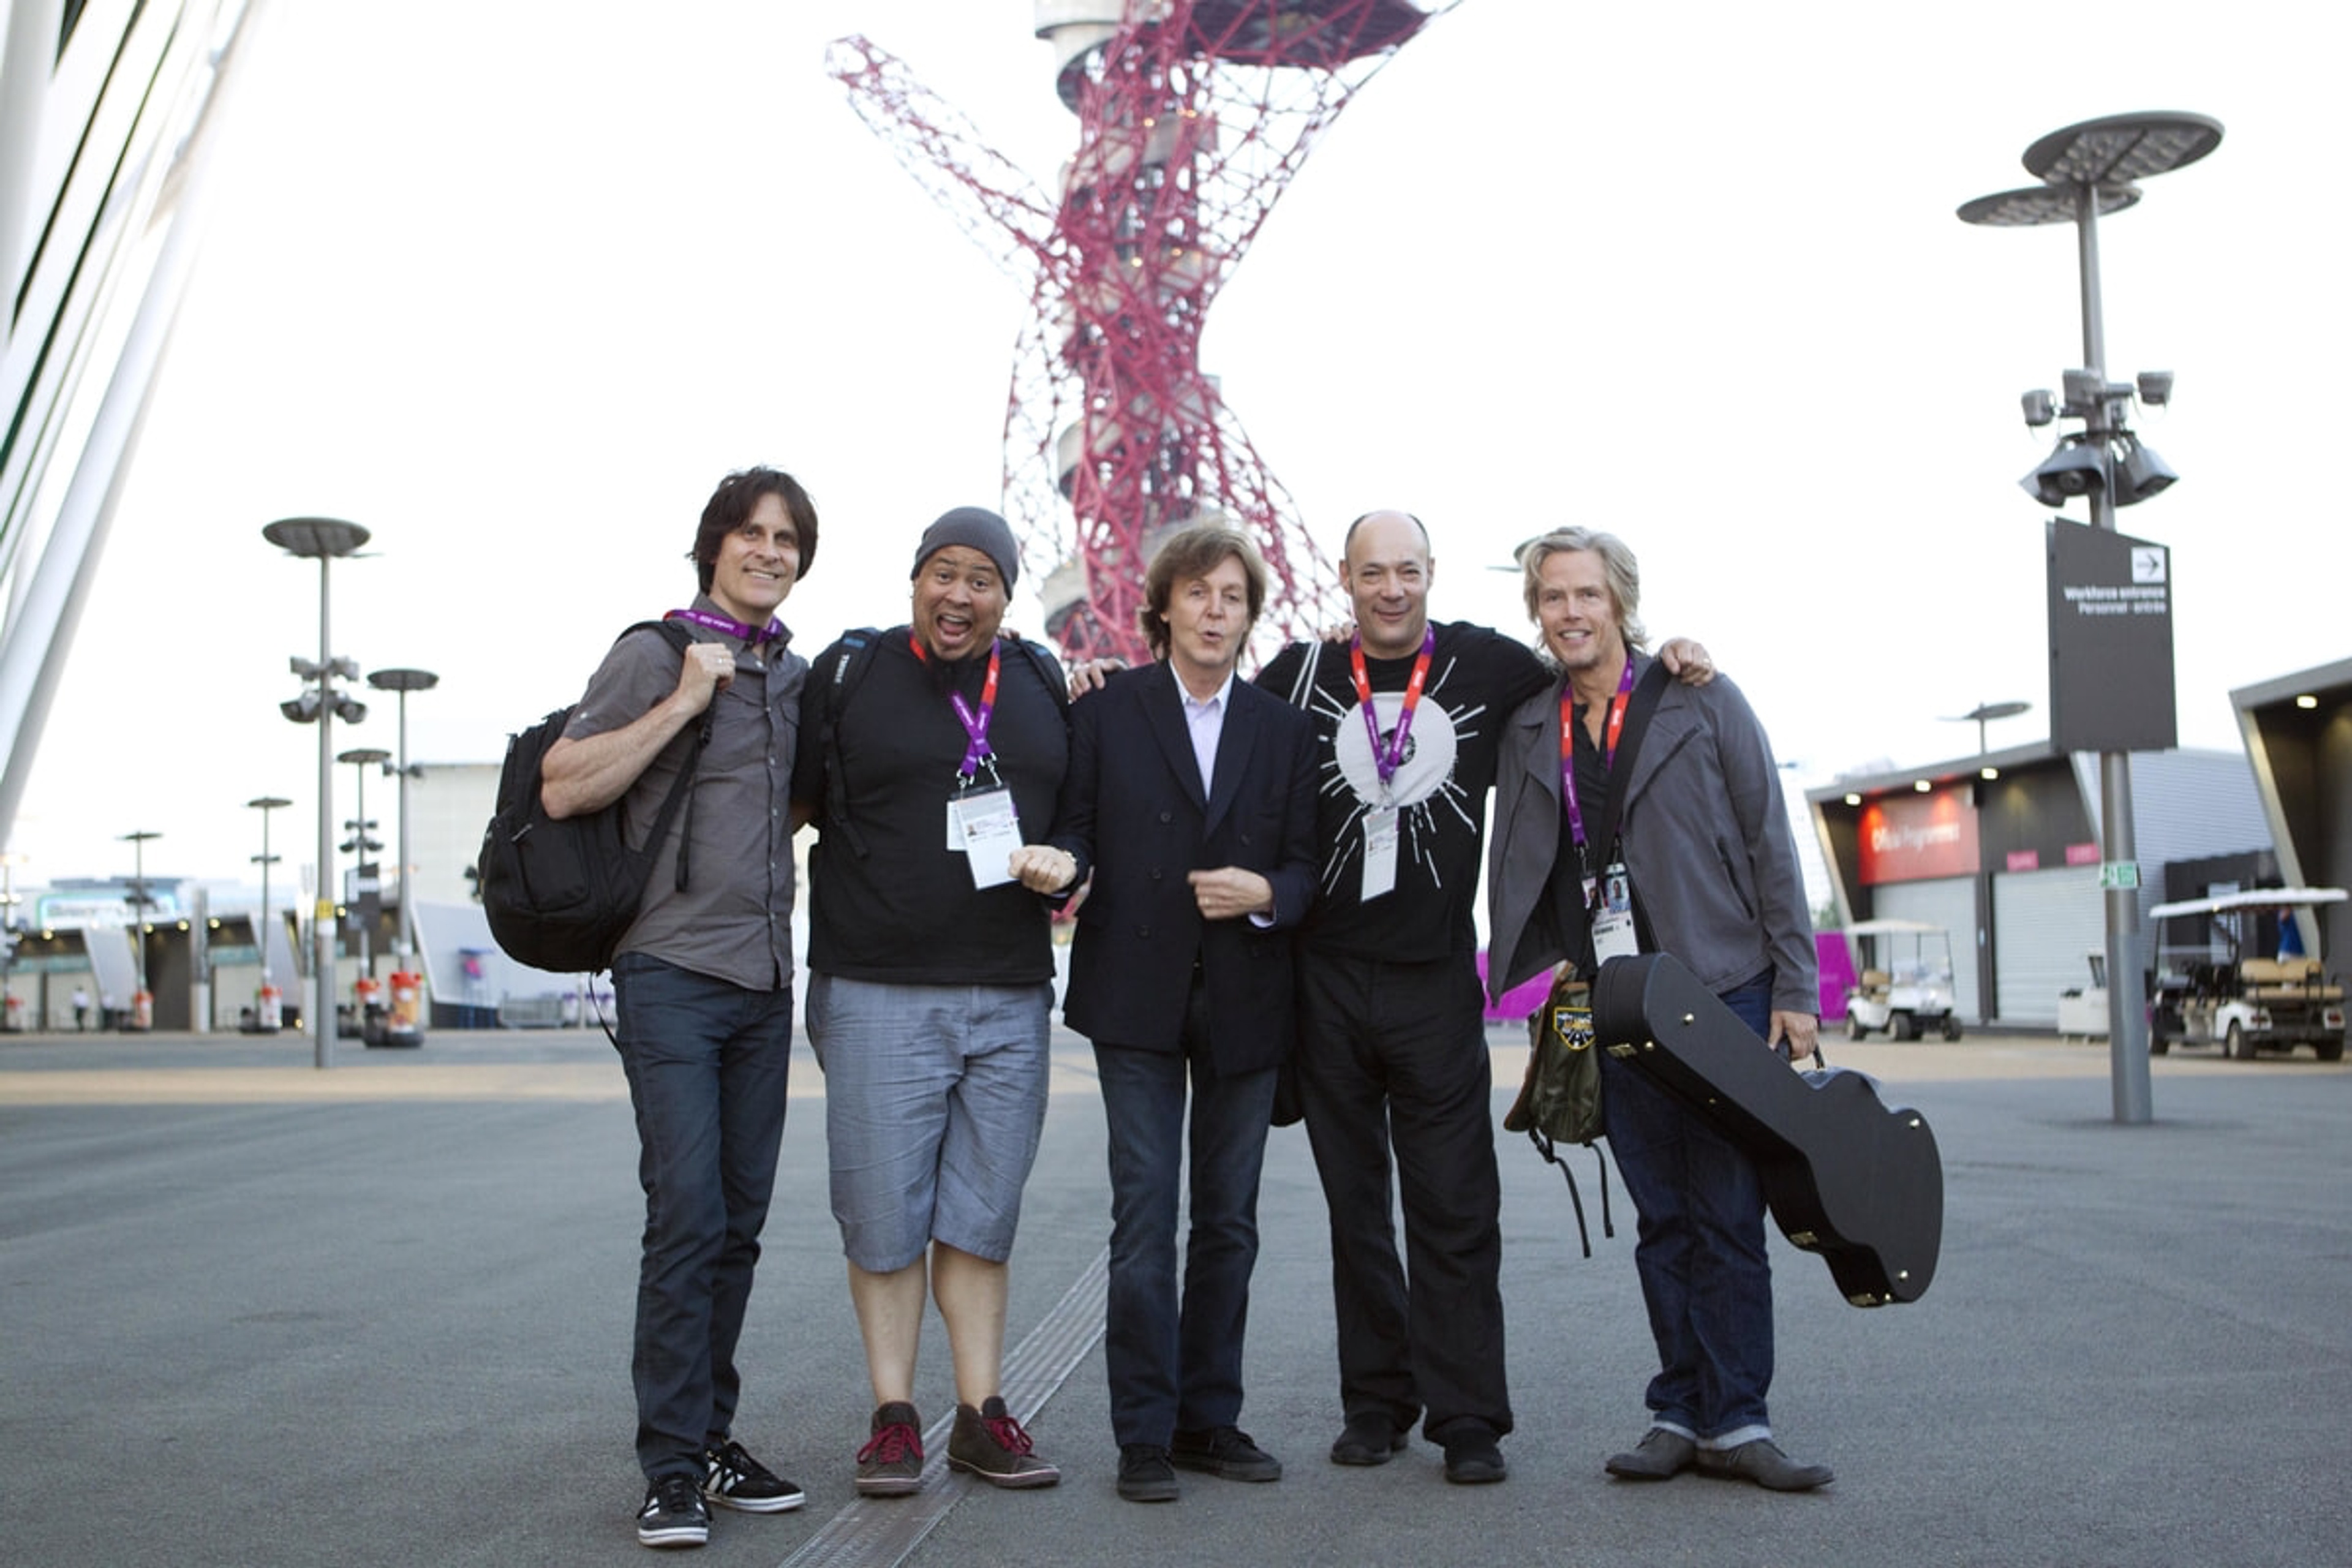 Rusty, Abe, Paul, Wix and Brian at the Olympic Opening Ceremony rehearsals, London, 27-Jul-12